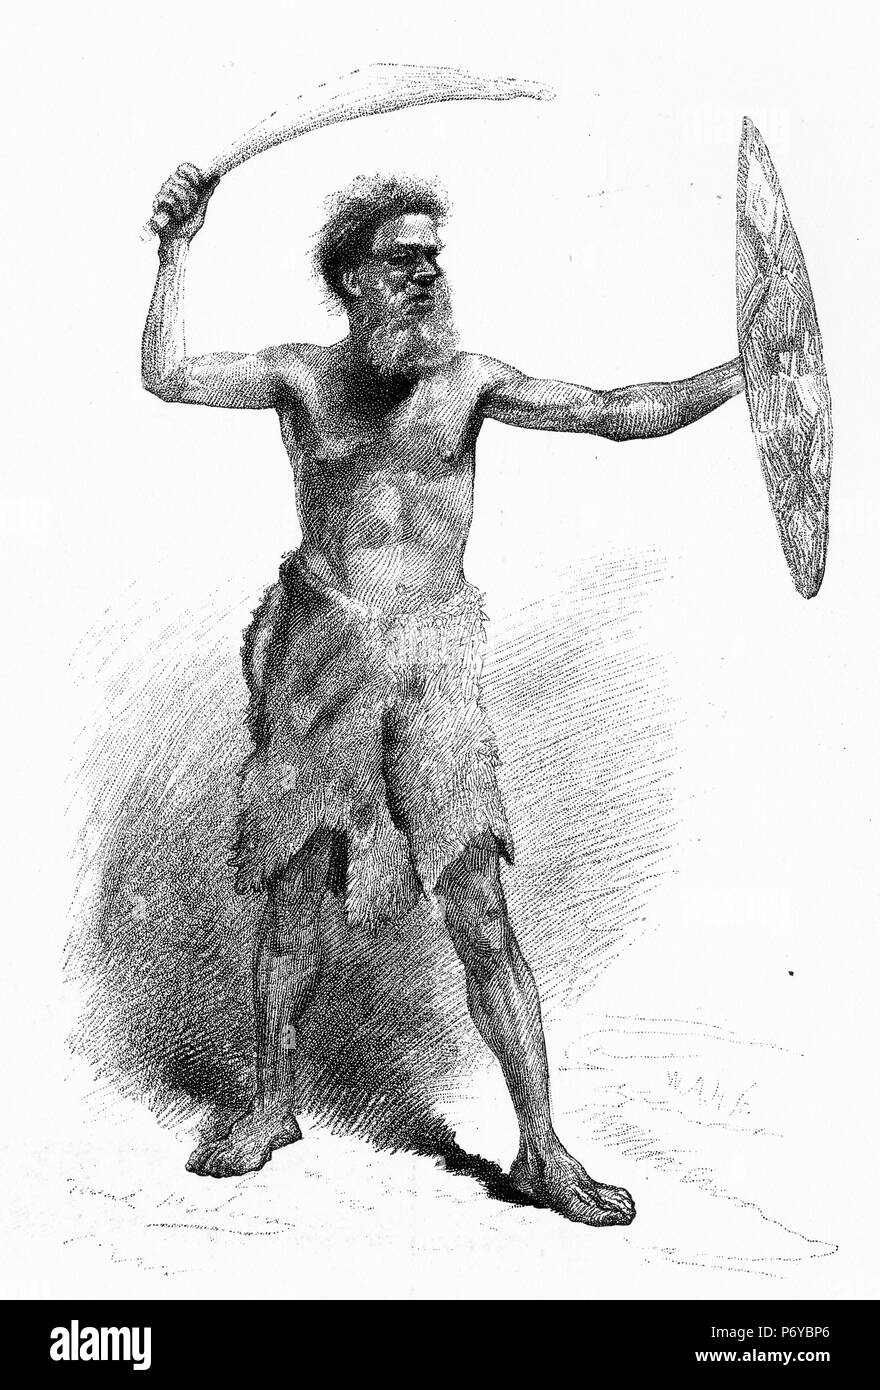 Engraving of an Aboriginal warrior armed with a club and a shield, Australia. From the Picturesque Atlas of Australasia Vol 3, 1886 Stock Photo